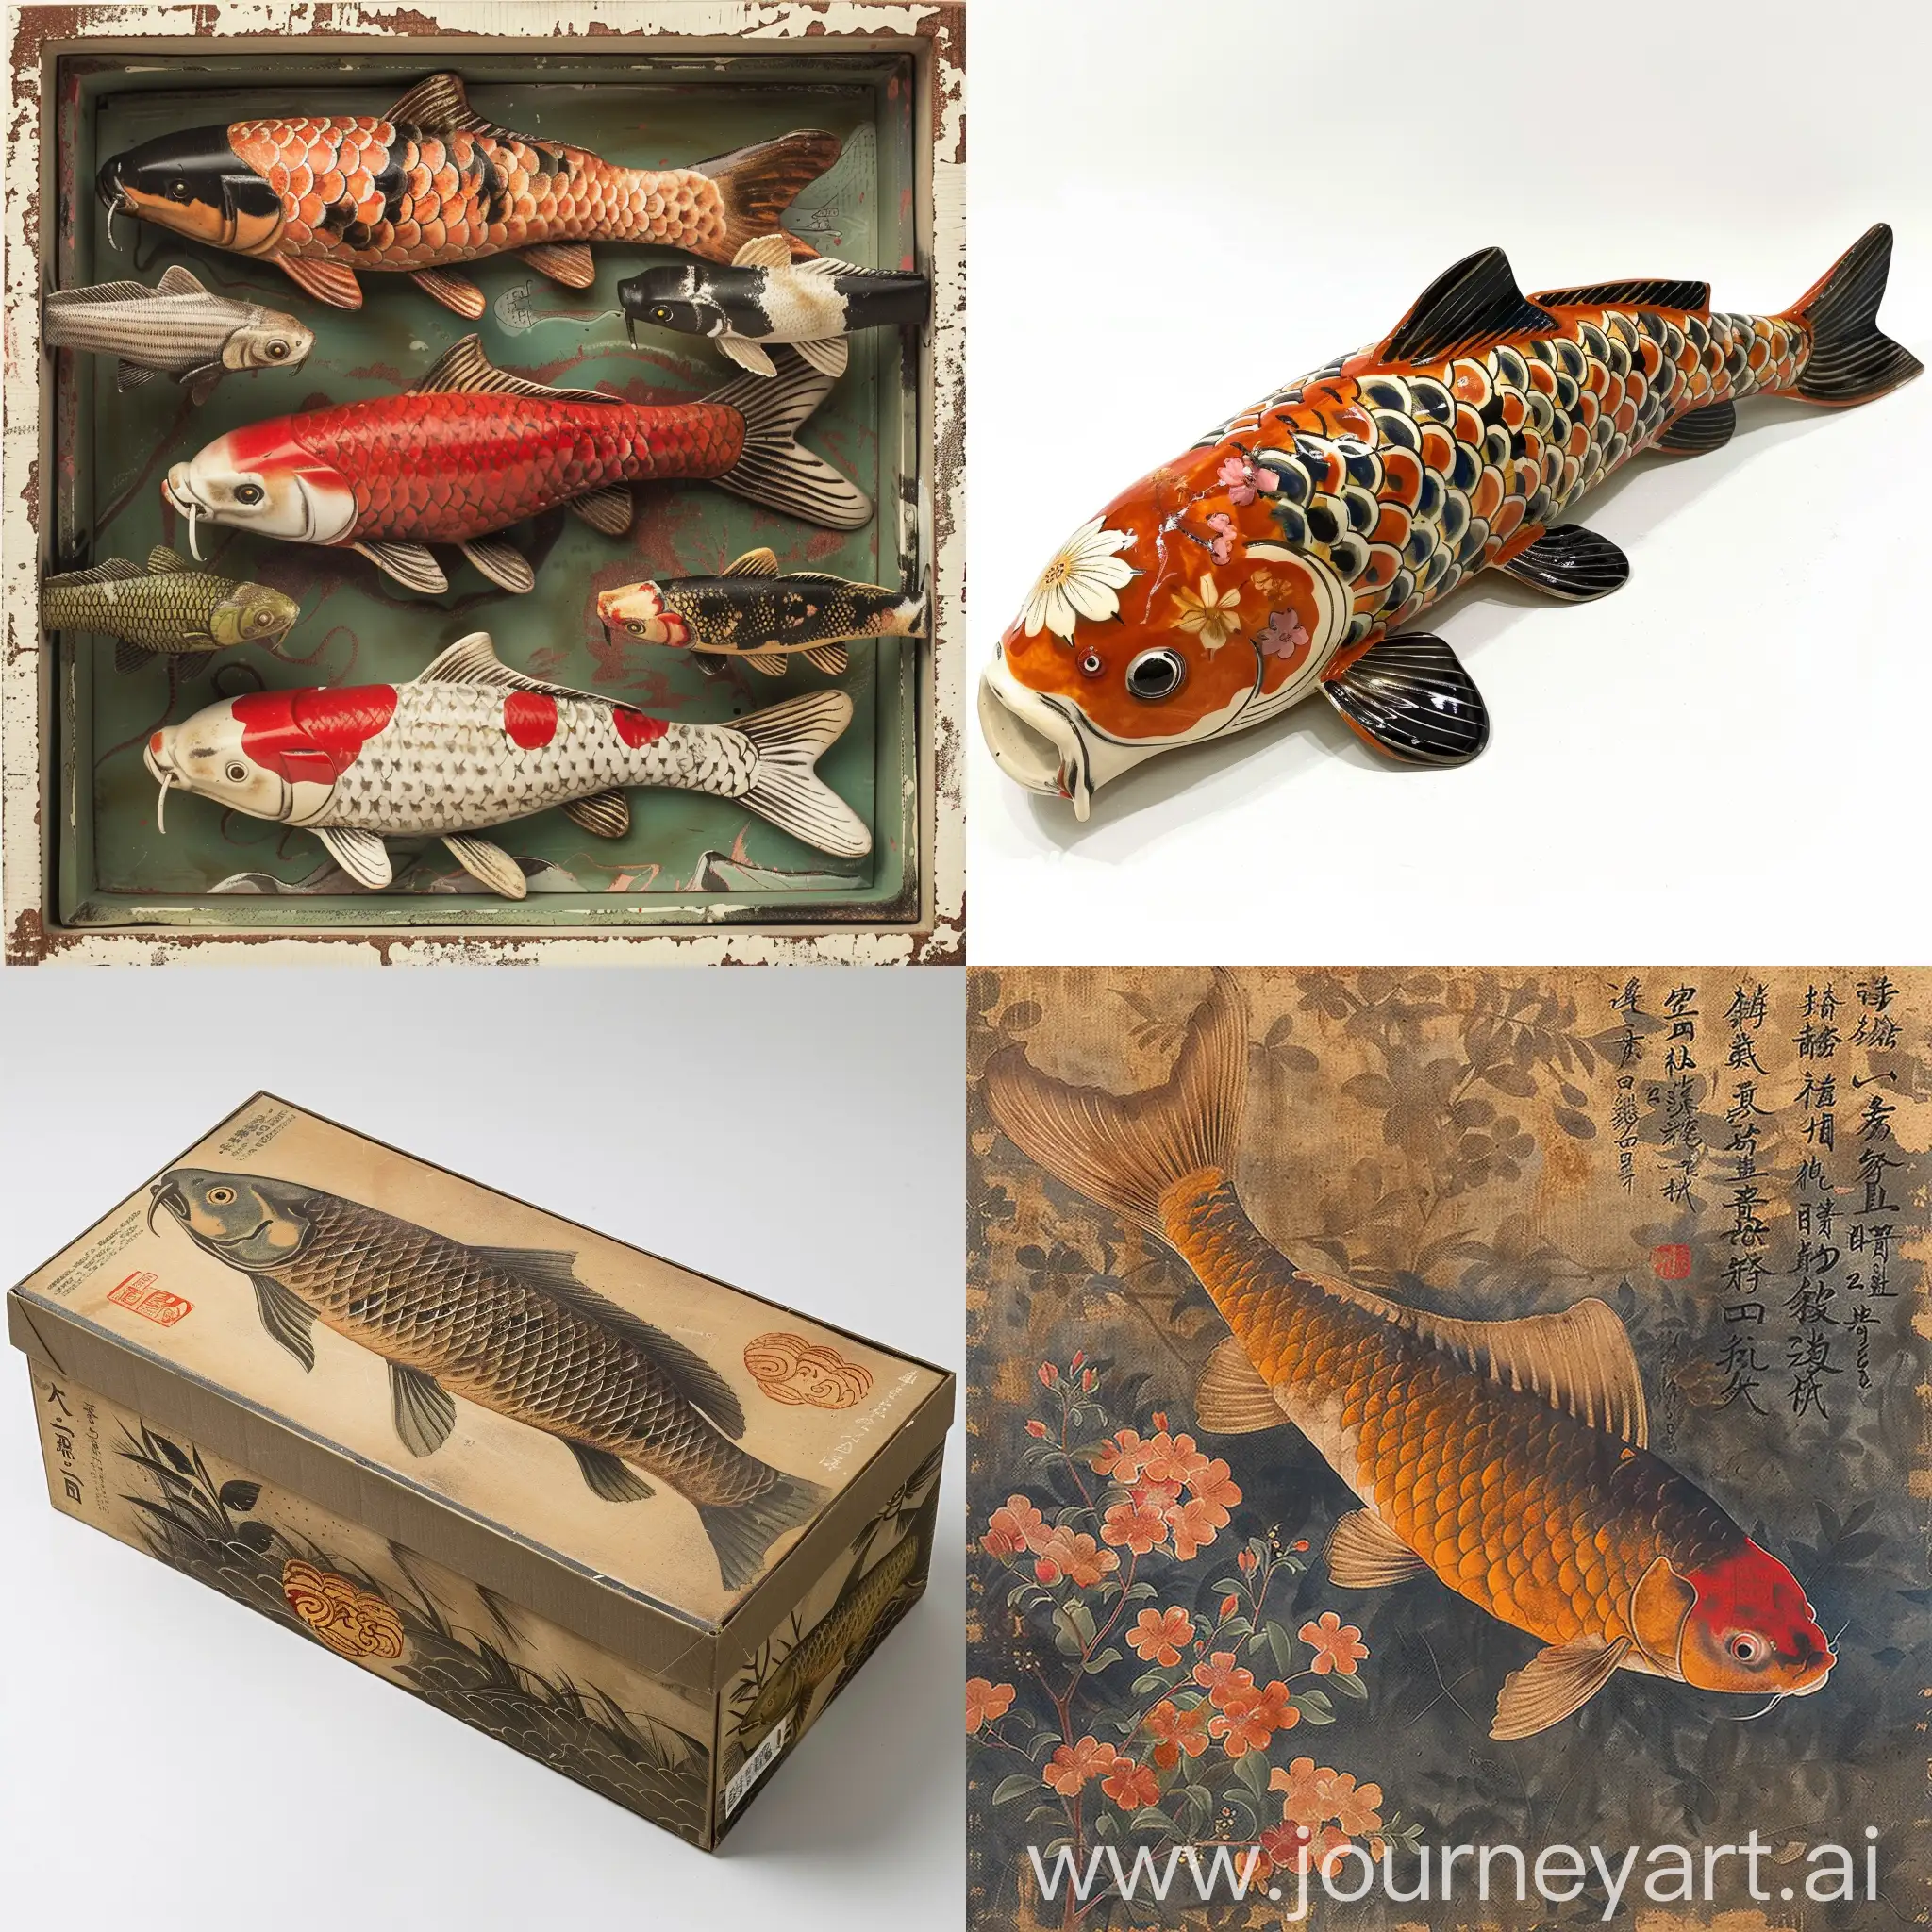 Japanese-Industrial-Carp-Arts-Precision-and-Elegance-in-Packaging-Design